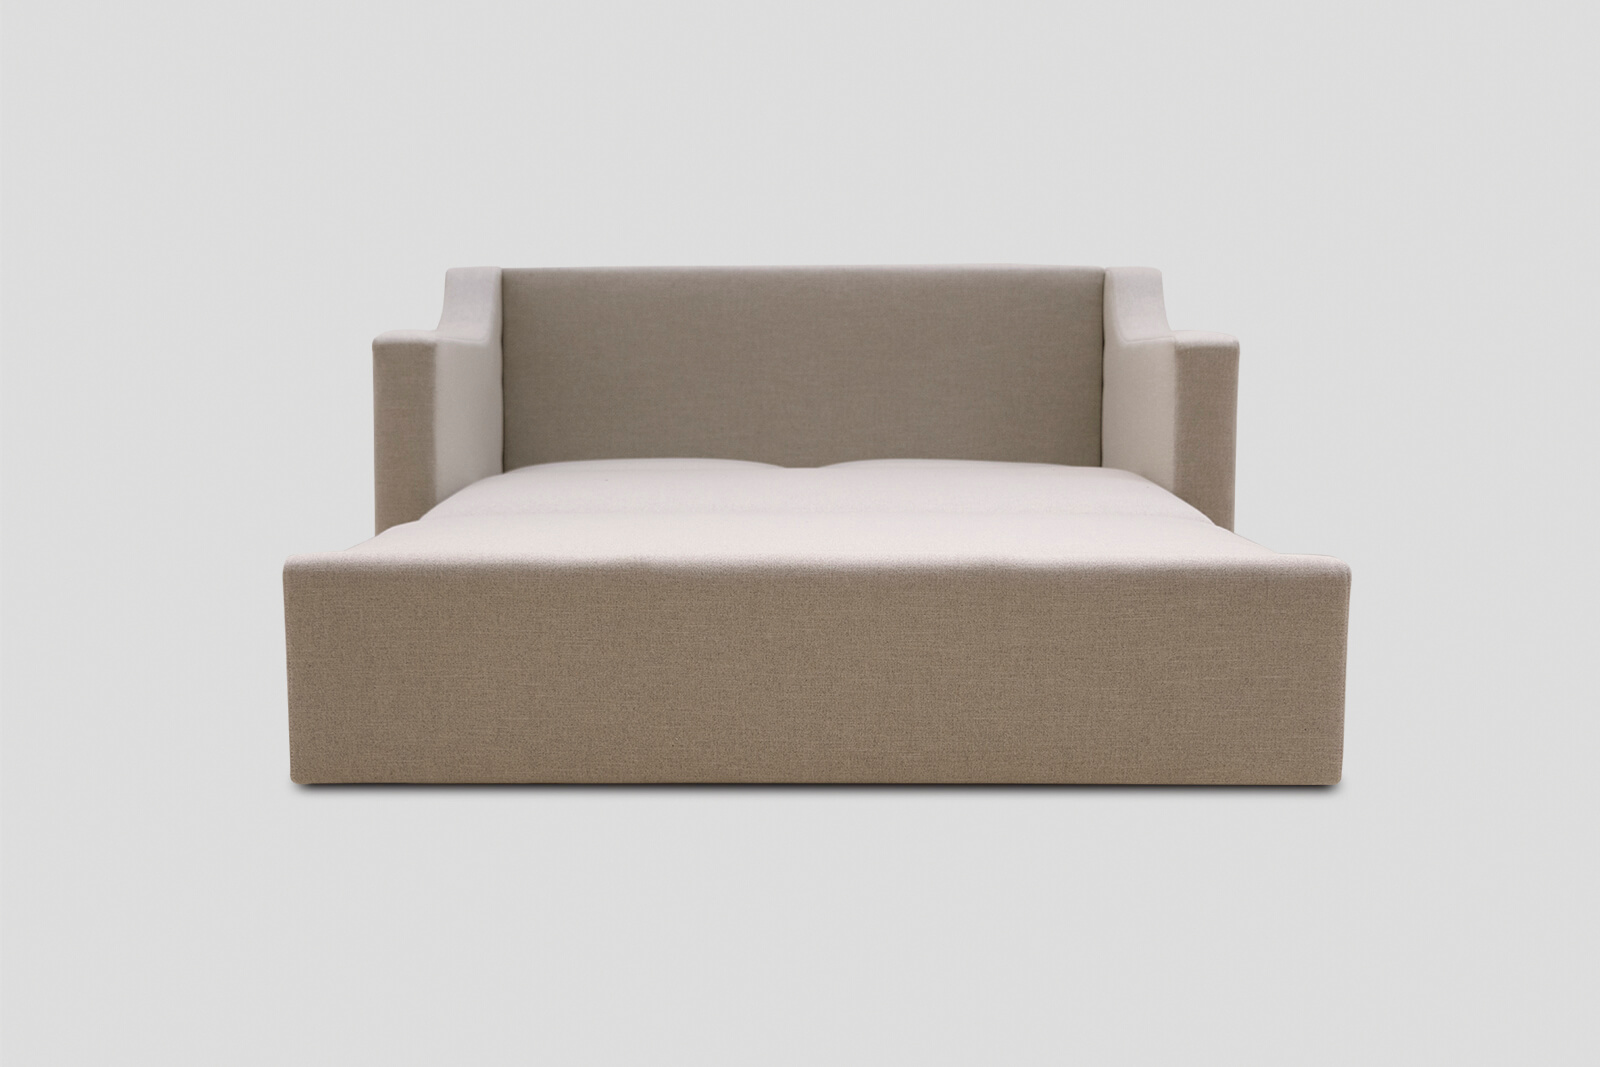 HBSB02-double-sofa-bed-coconut-front-bed